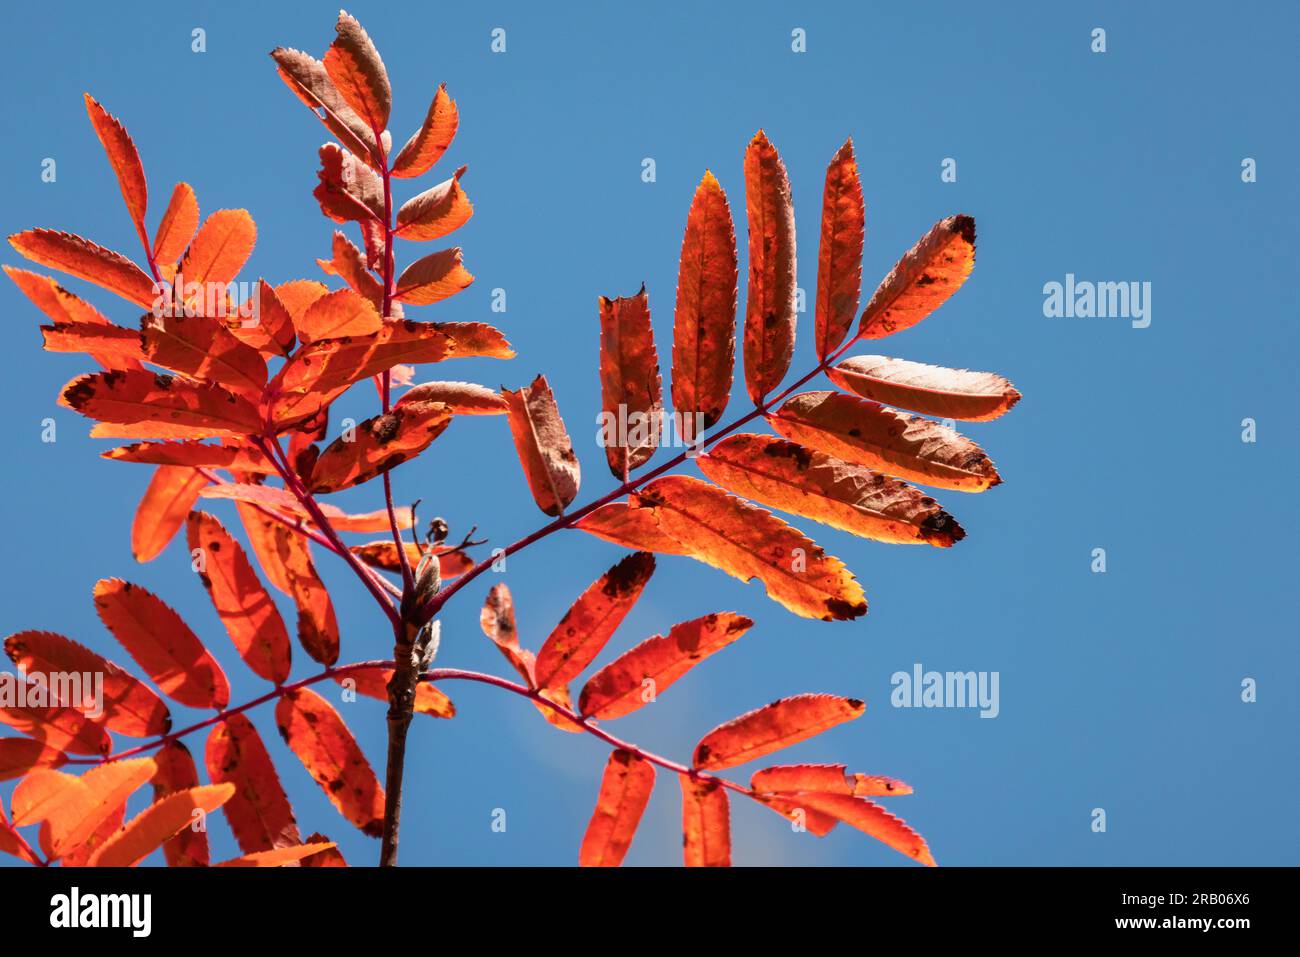 Red  autumn leaves of a rowan tree are under clear blue sky, close up photo with selective focus. Fall season natural photo background Stock Photo